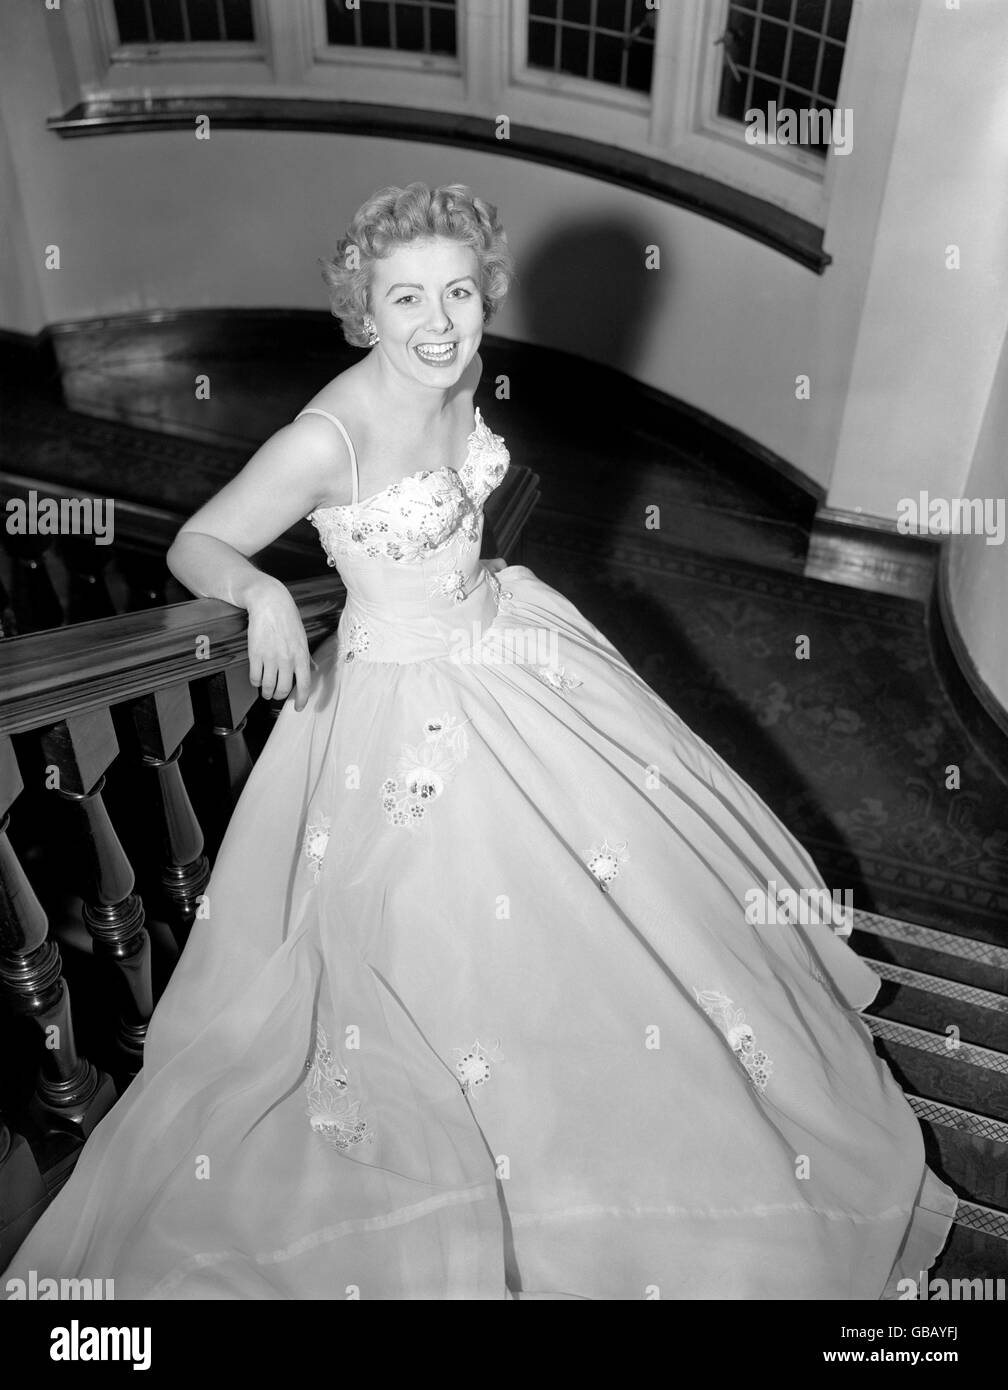 Singer Edna Savage was trying on a new evening gown in her London hotel before flying out to Cyprus to spend a month entertaining the troops. The dress is of ice blue nylon with a white floral motif, encrusted with sequins, pearls and diamante. Stock Photo